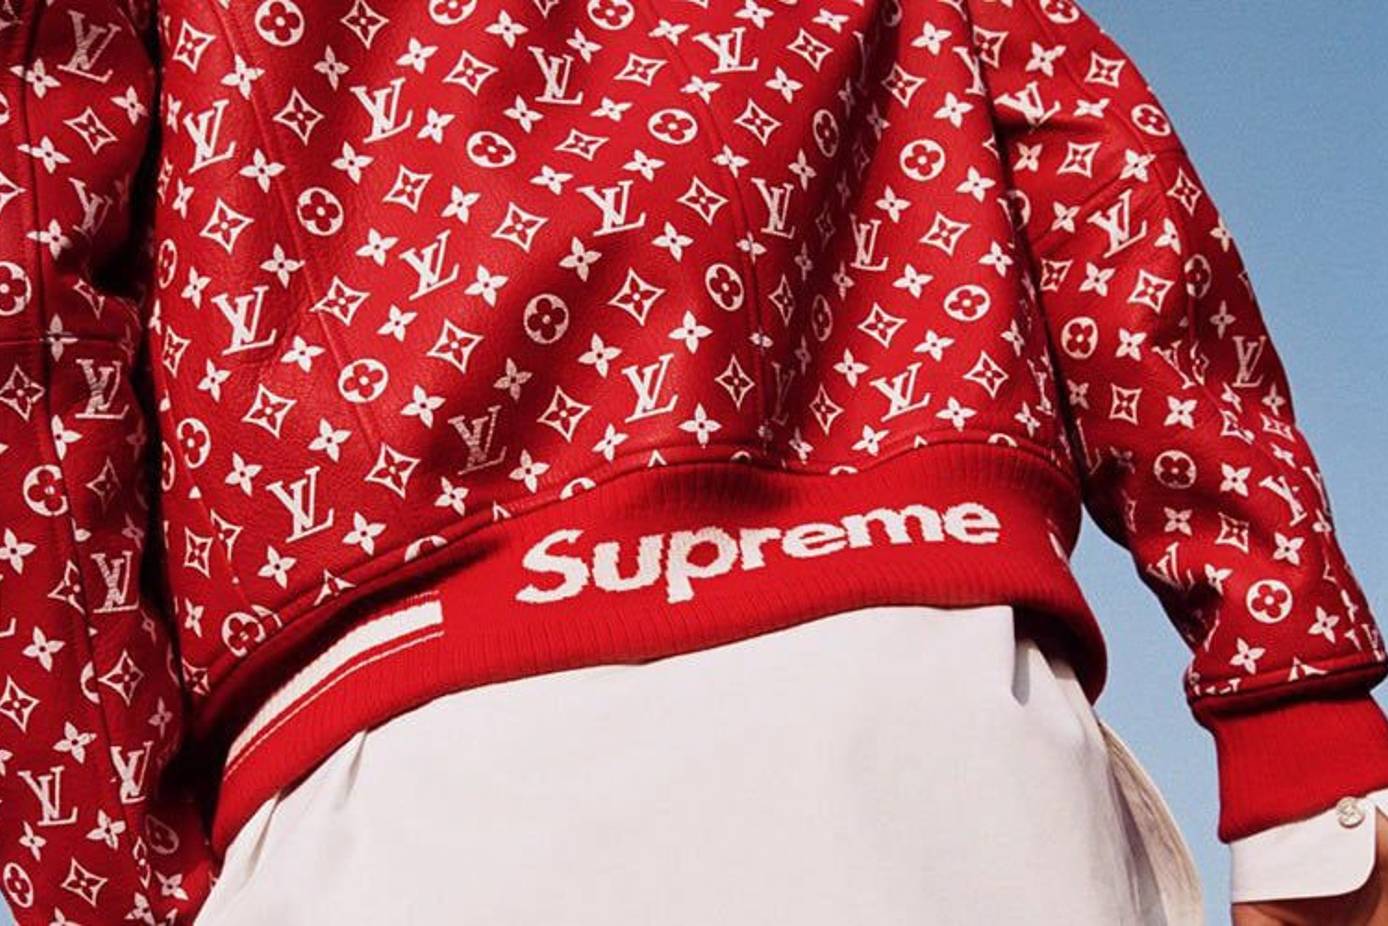 Supreme/Louis Vuitton box logo hoodie in red rumoured to be for